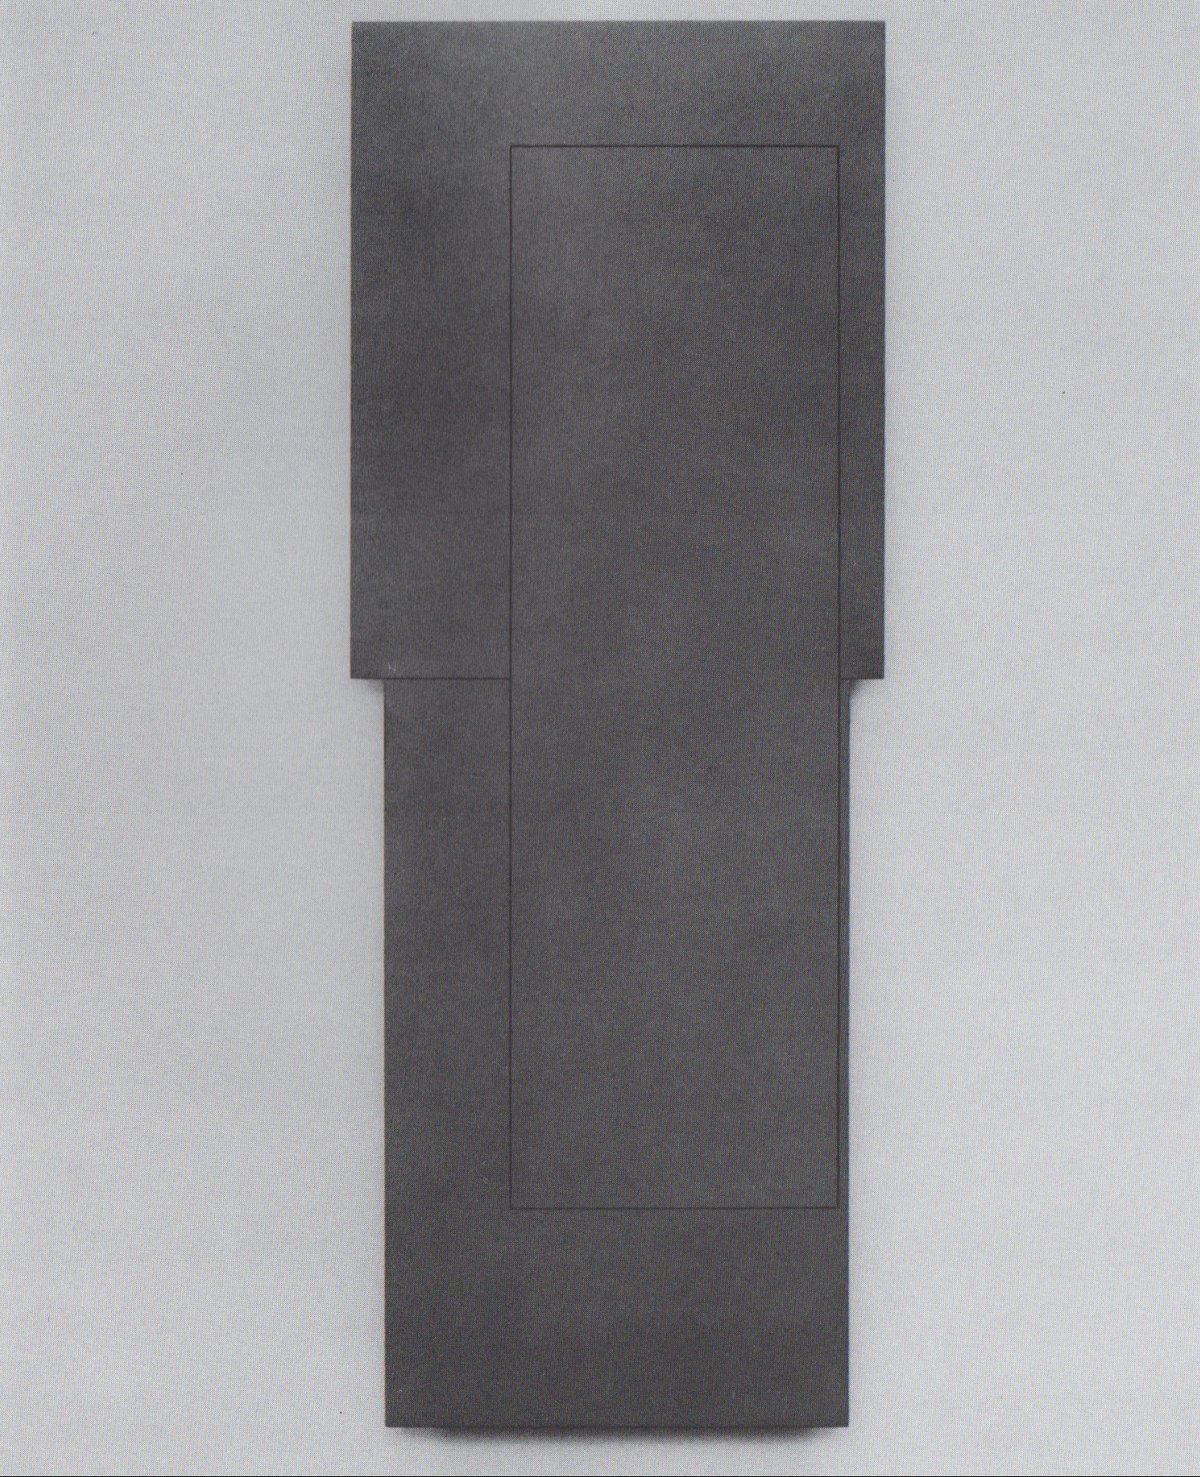 fig. 2: &quot;assembly of rectangles I&quot; (1981), oil on plywood, 159 x 60 cm